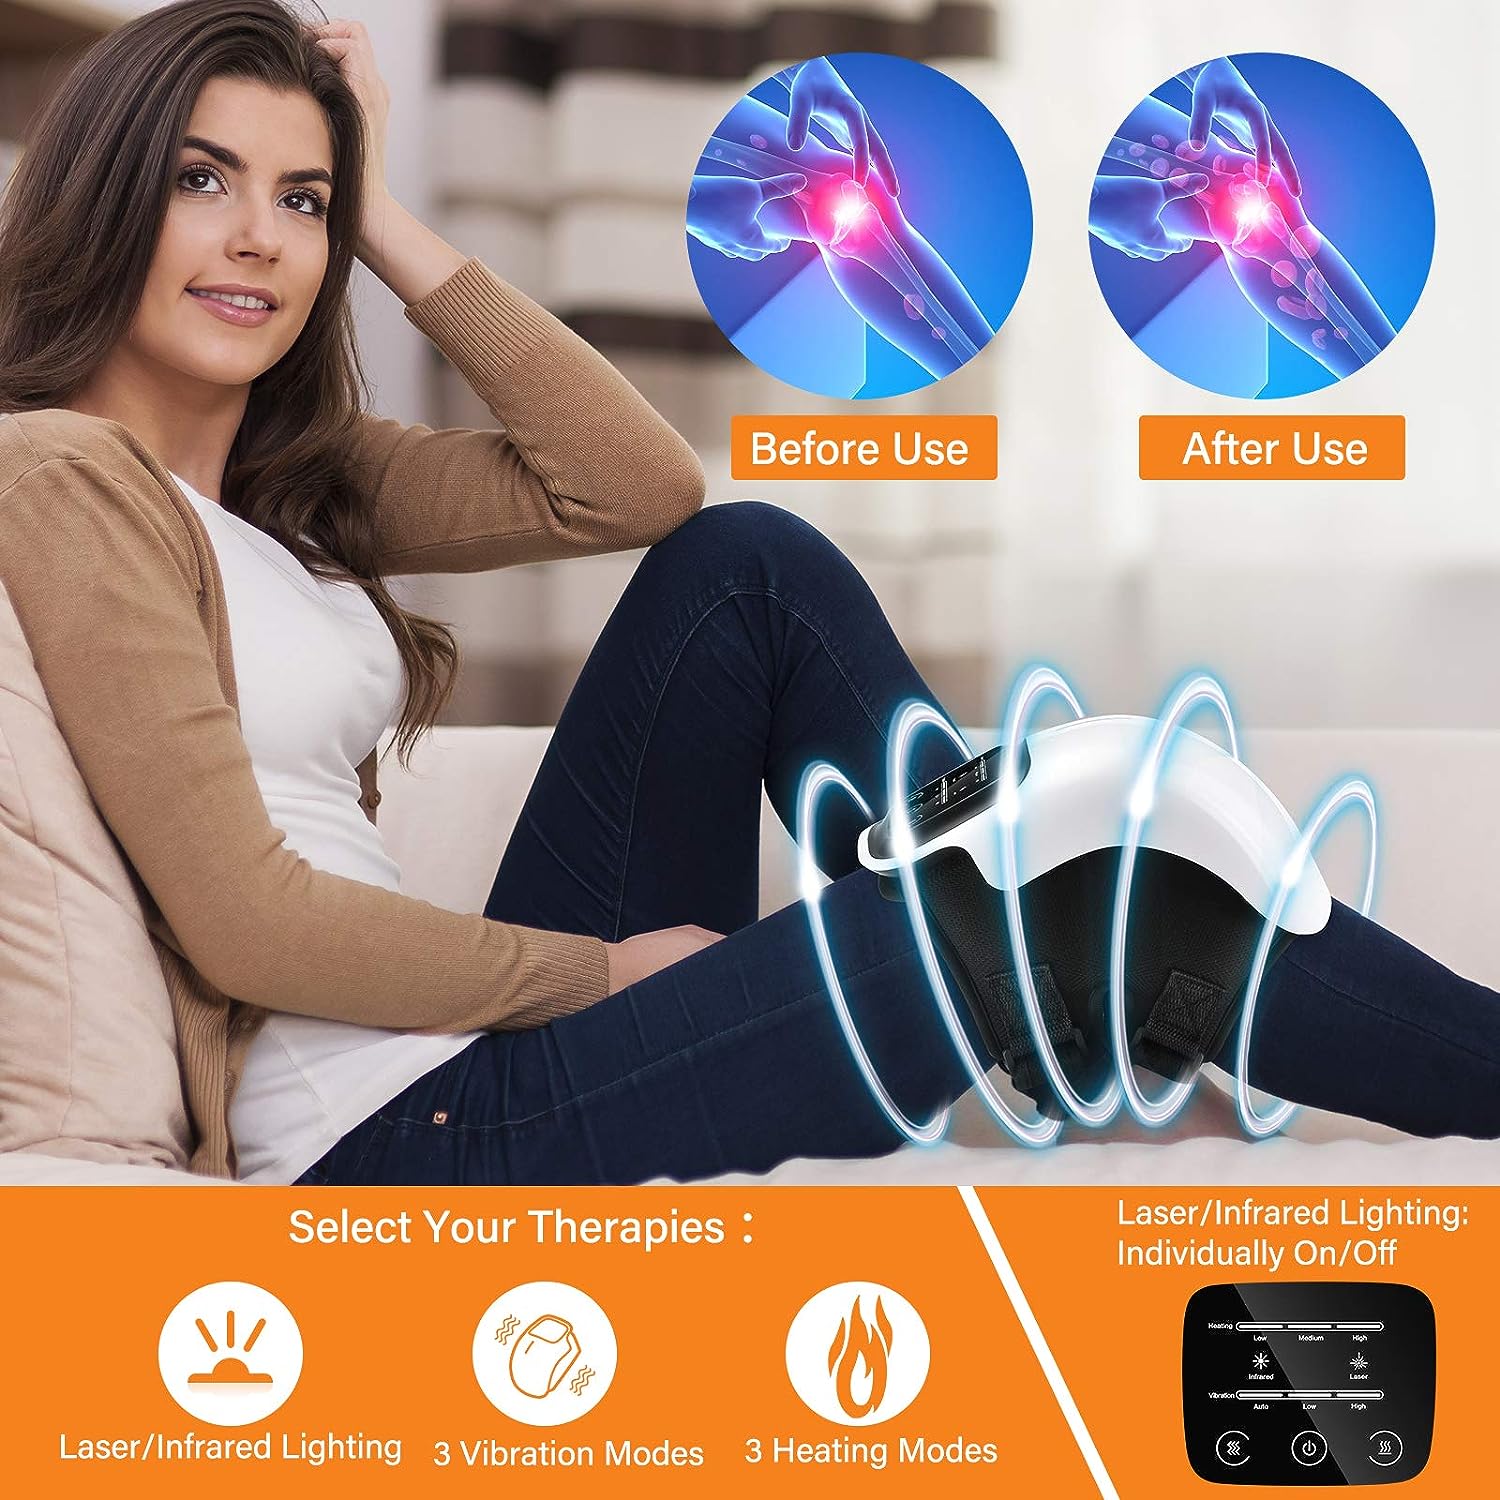 FORTHiQ Cordless Knee Massager, Powerful Infrared Heat and Vibration Knee Pain Relief for Swelling Stiff Joints, Stretched Ligament and Muscles Injuries, July 2022 Upgrade with Longer Knee Straps